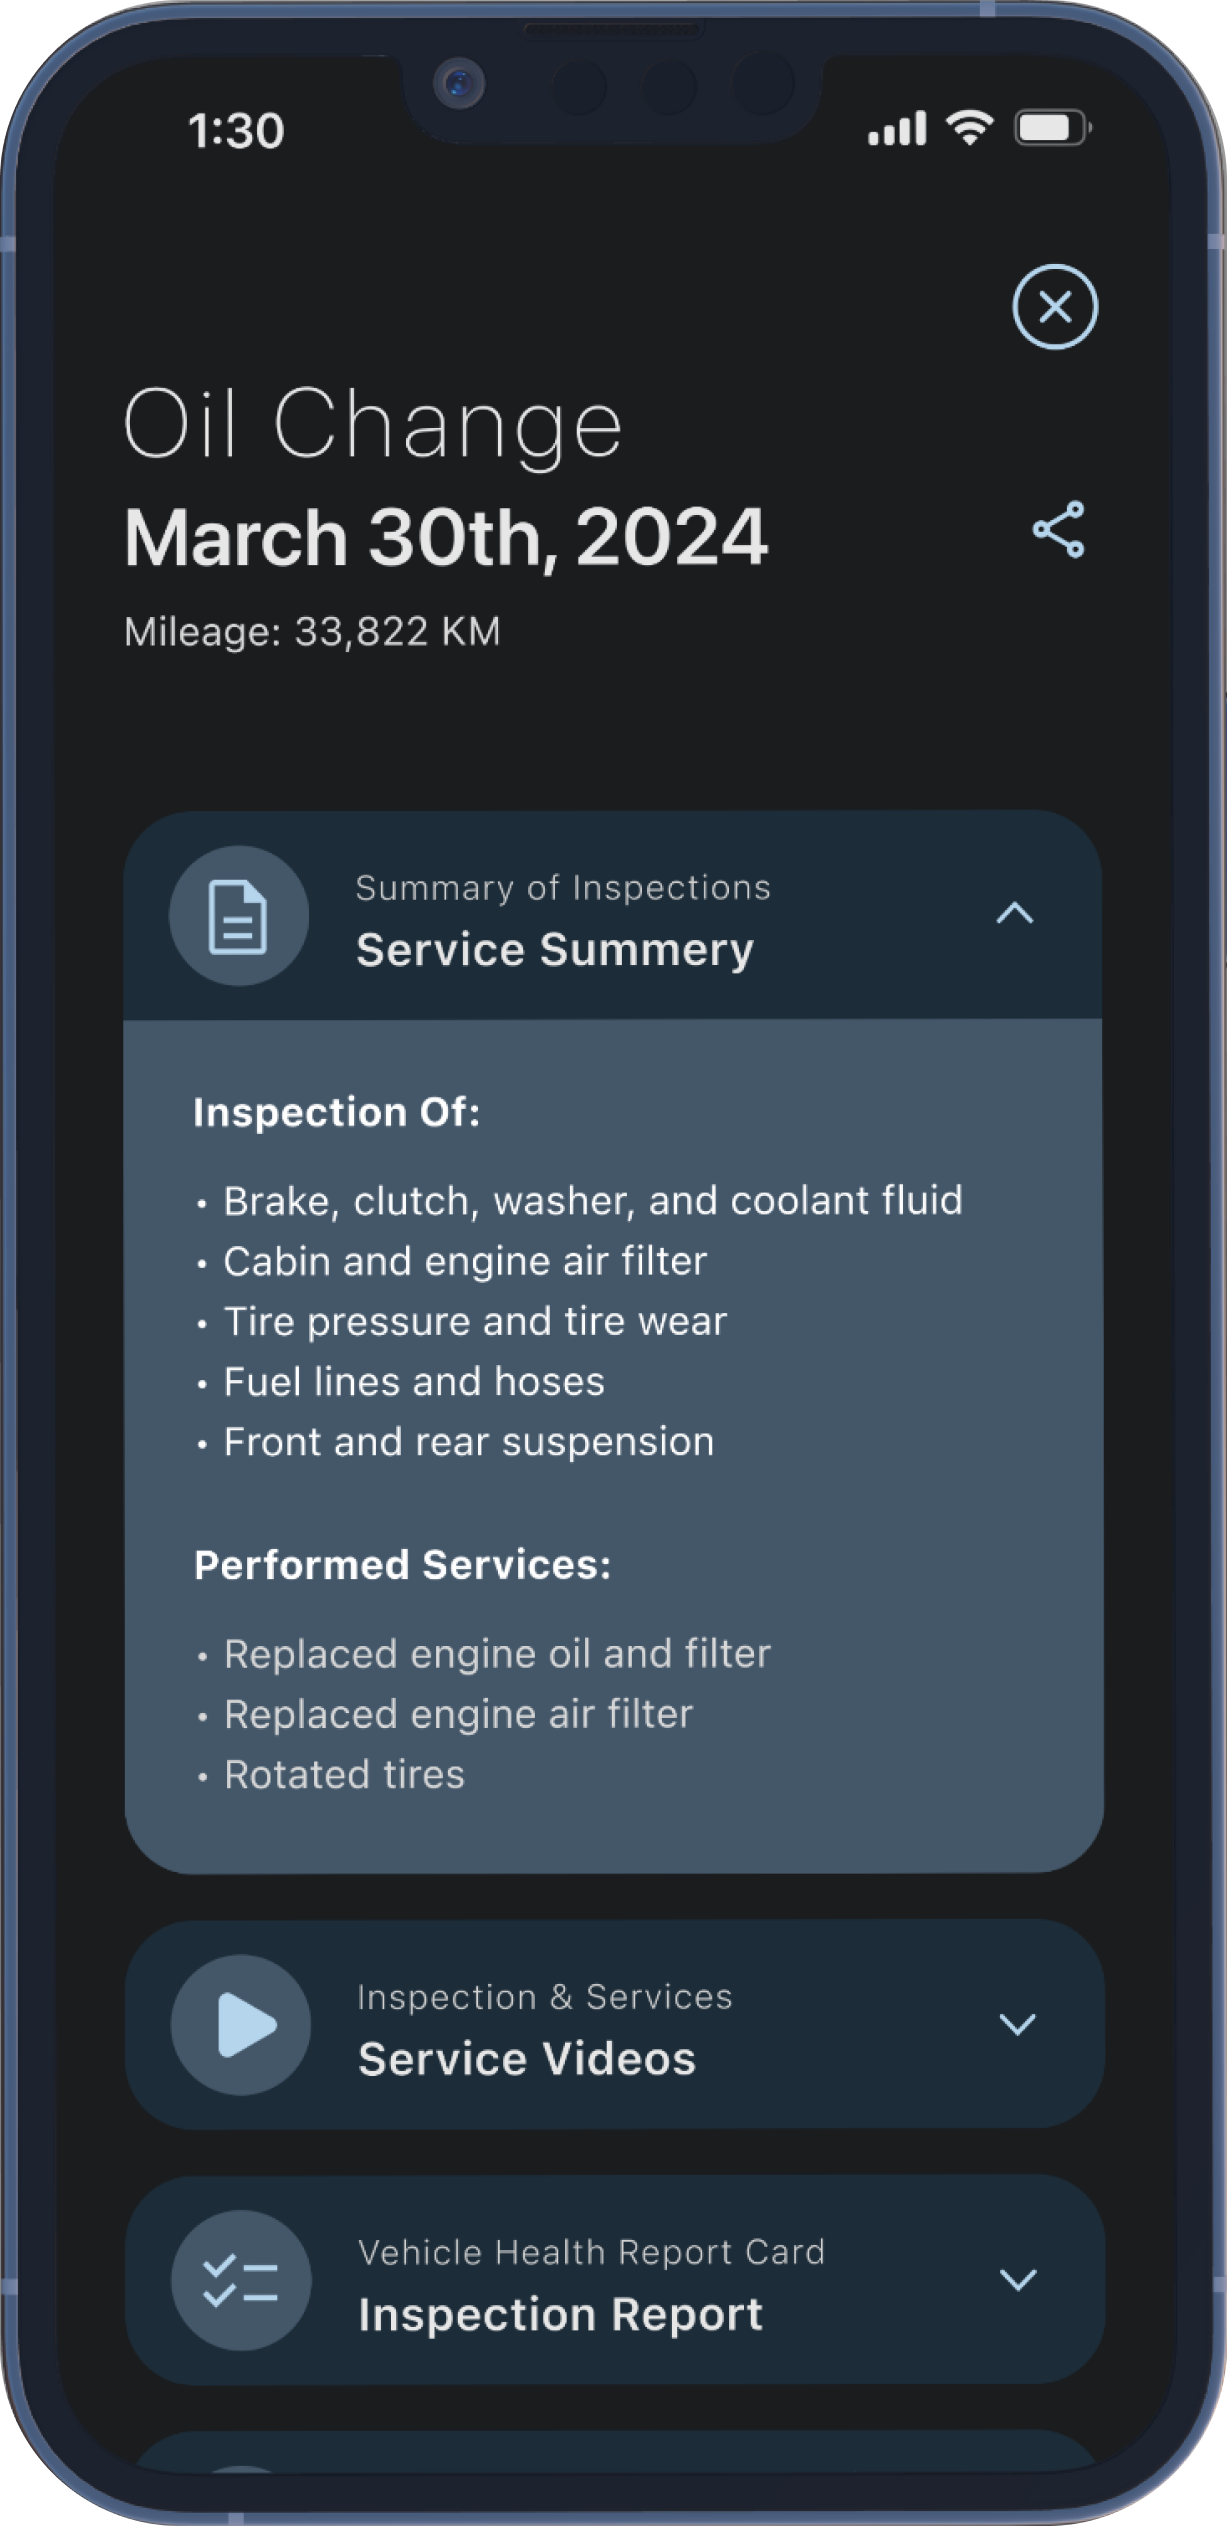 A screenshot of the details from a previous oil change